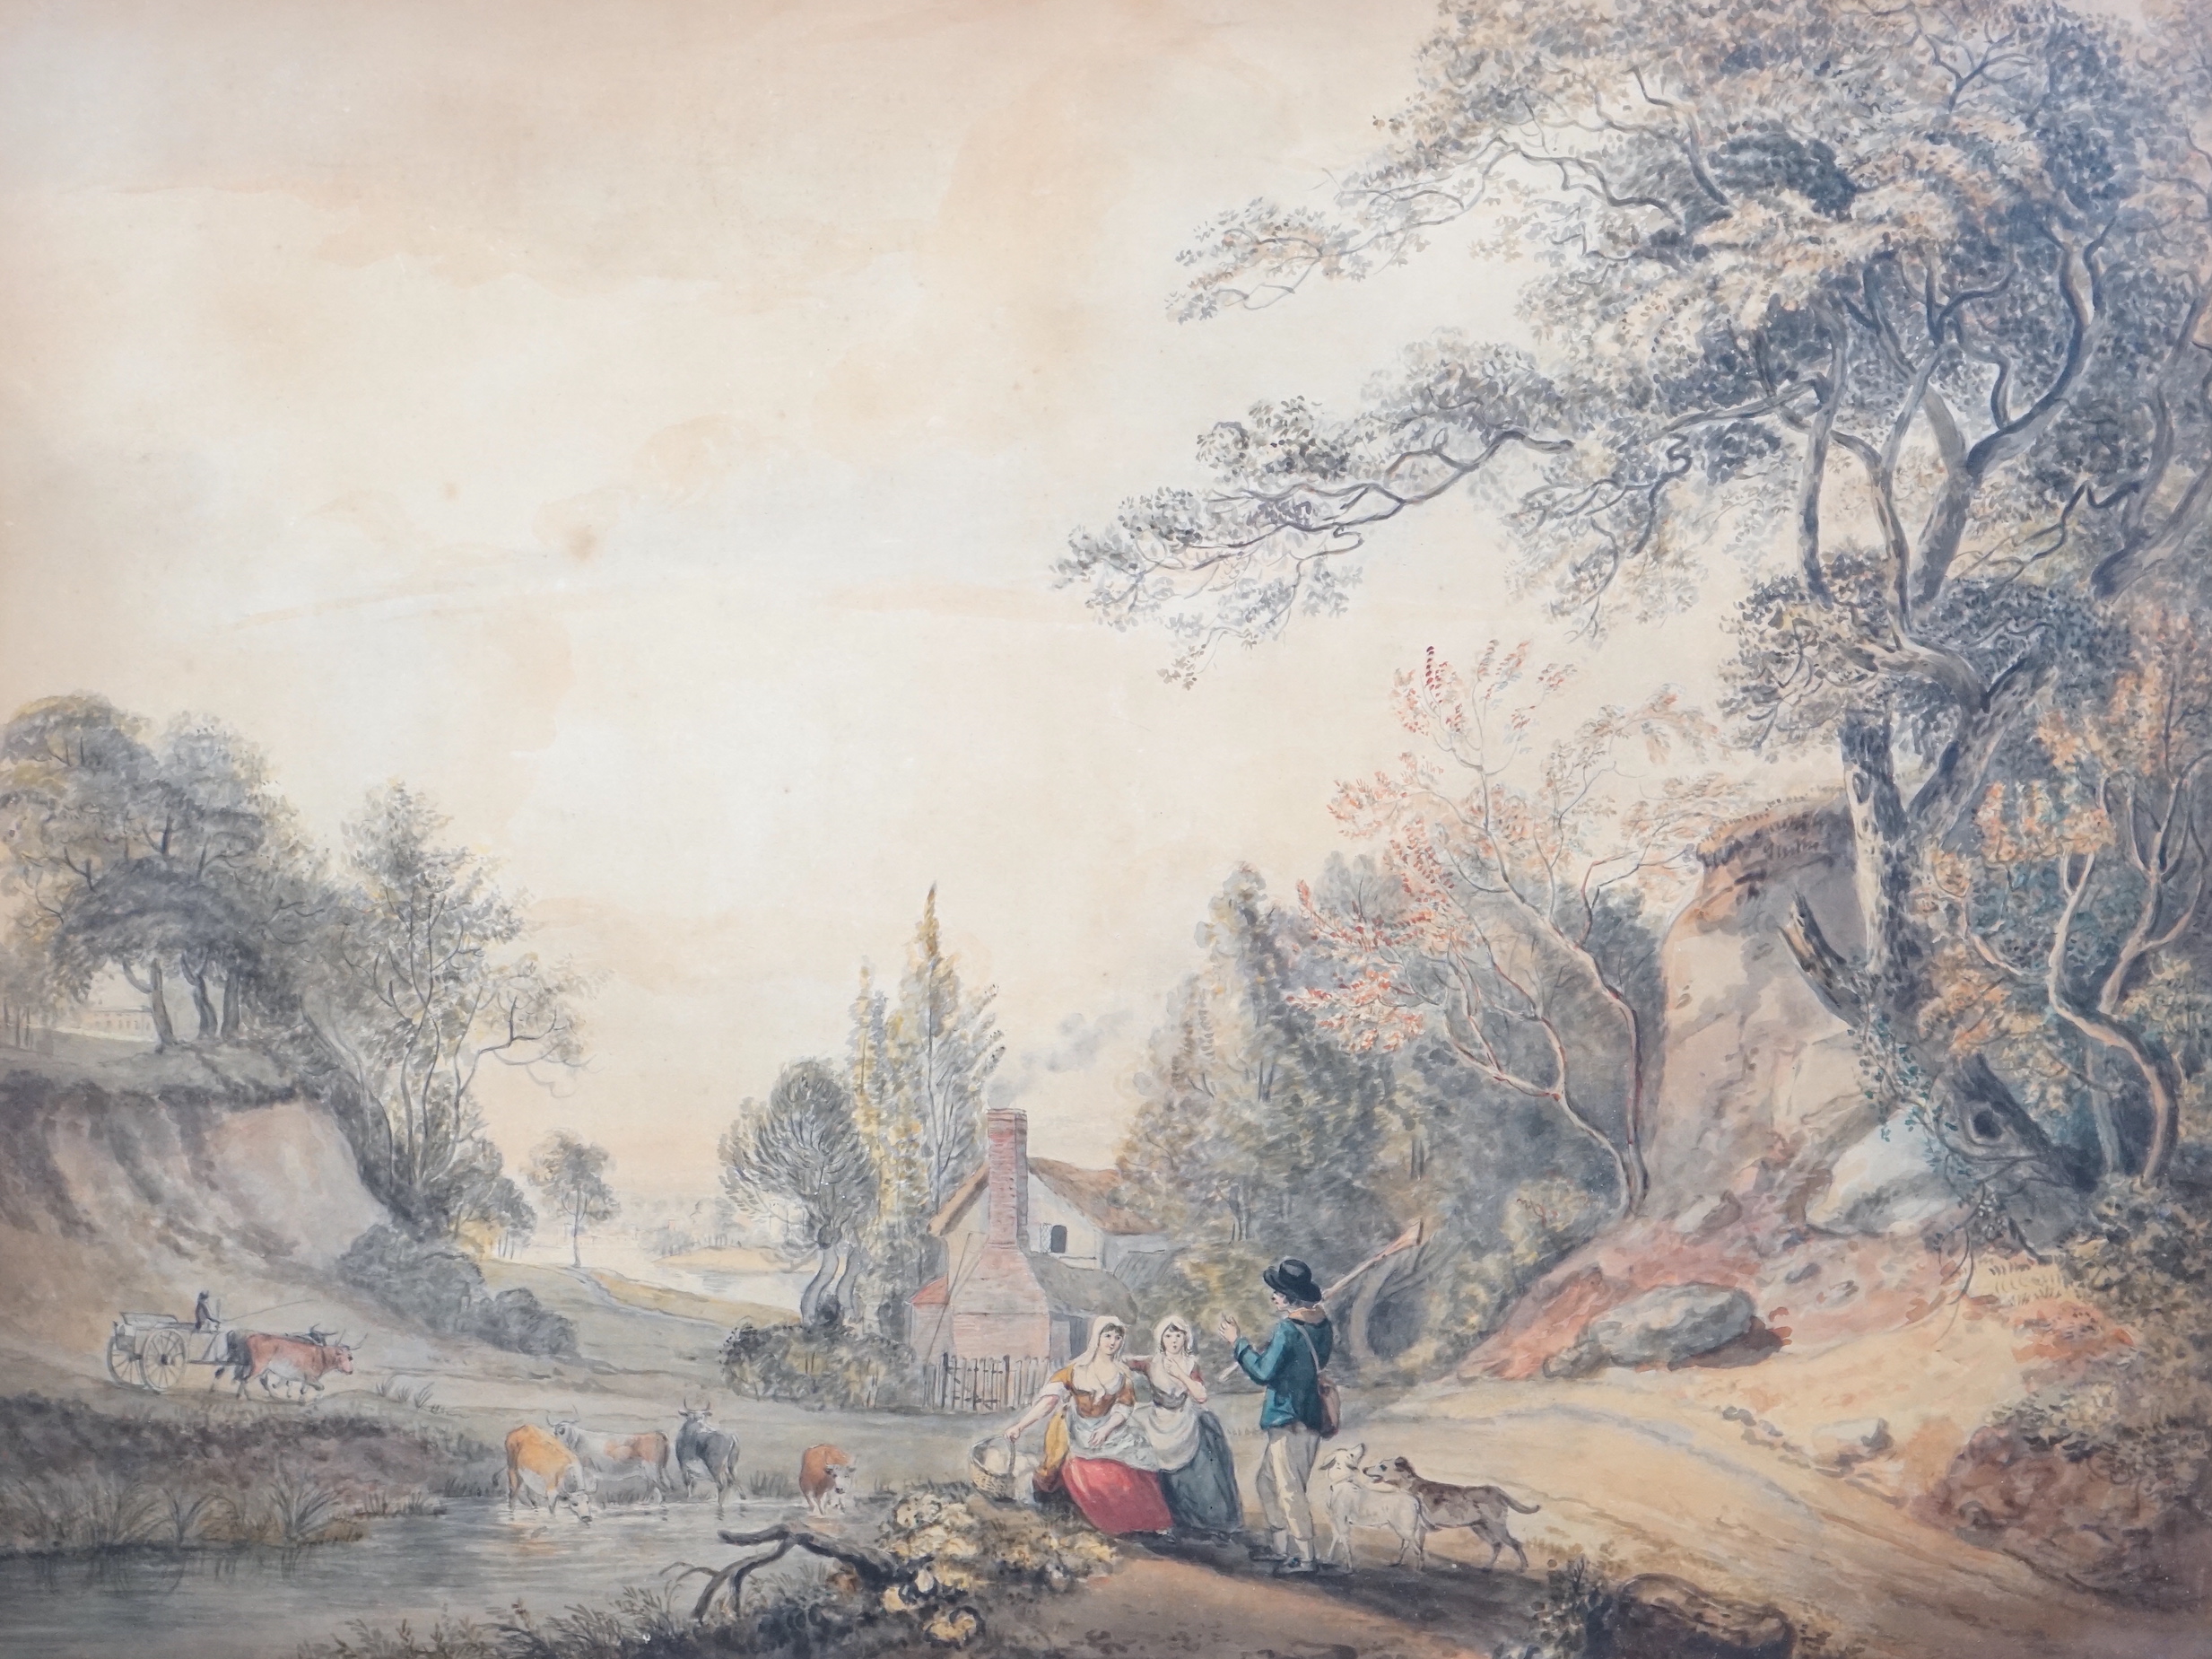 Paul Sandby RA (English, 1725-1809), A sportsman with his dogs talking with two country girls in a landscape, watercolour, 52 x 68cm